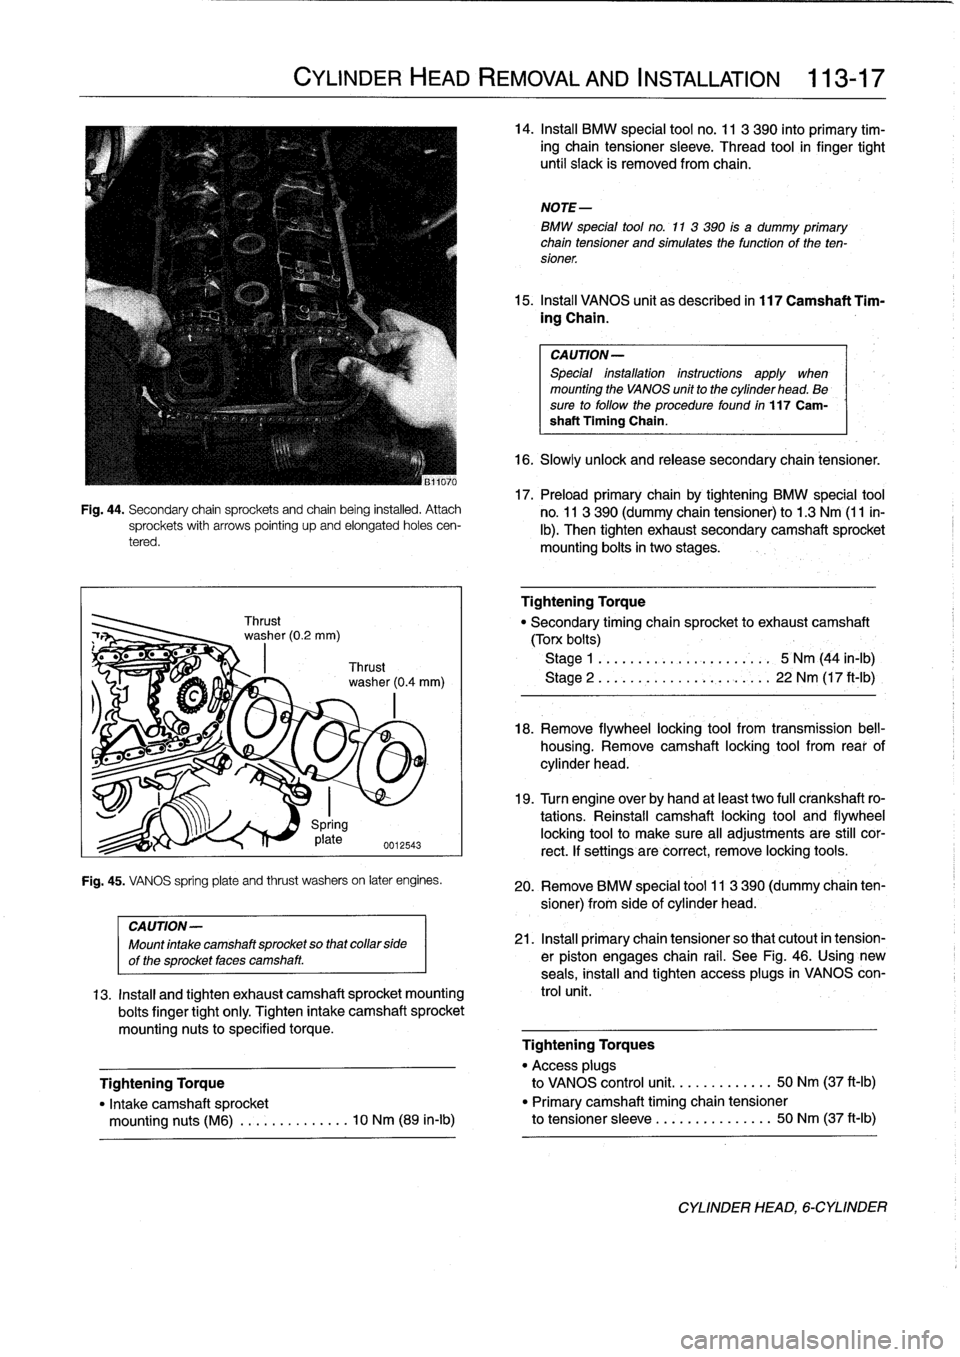 BMW 323i 1998 E36 Workshop Manual 
Fig
.
44
.
Secondary
chain
sprockets
and
chain
being
installed
.
Attachsprockets
with
arrows
pointing
upand
elongated
holes
cen-
tered
.

CYLINDER
HEAD
REMOVAL
AND
INSTALLATION

	

113-17

Spring
17
